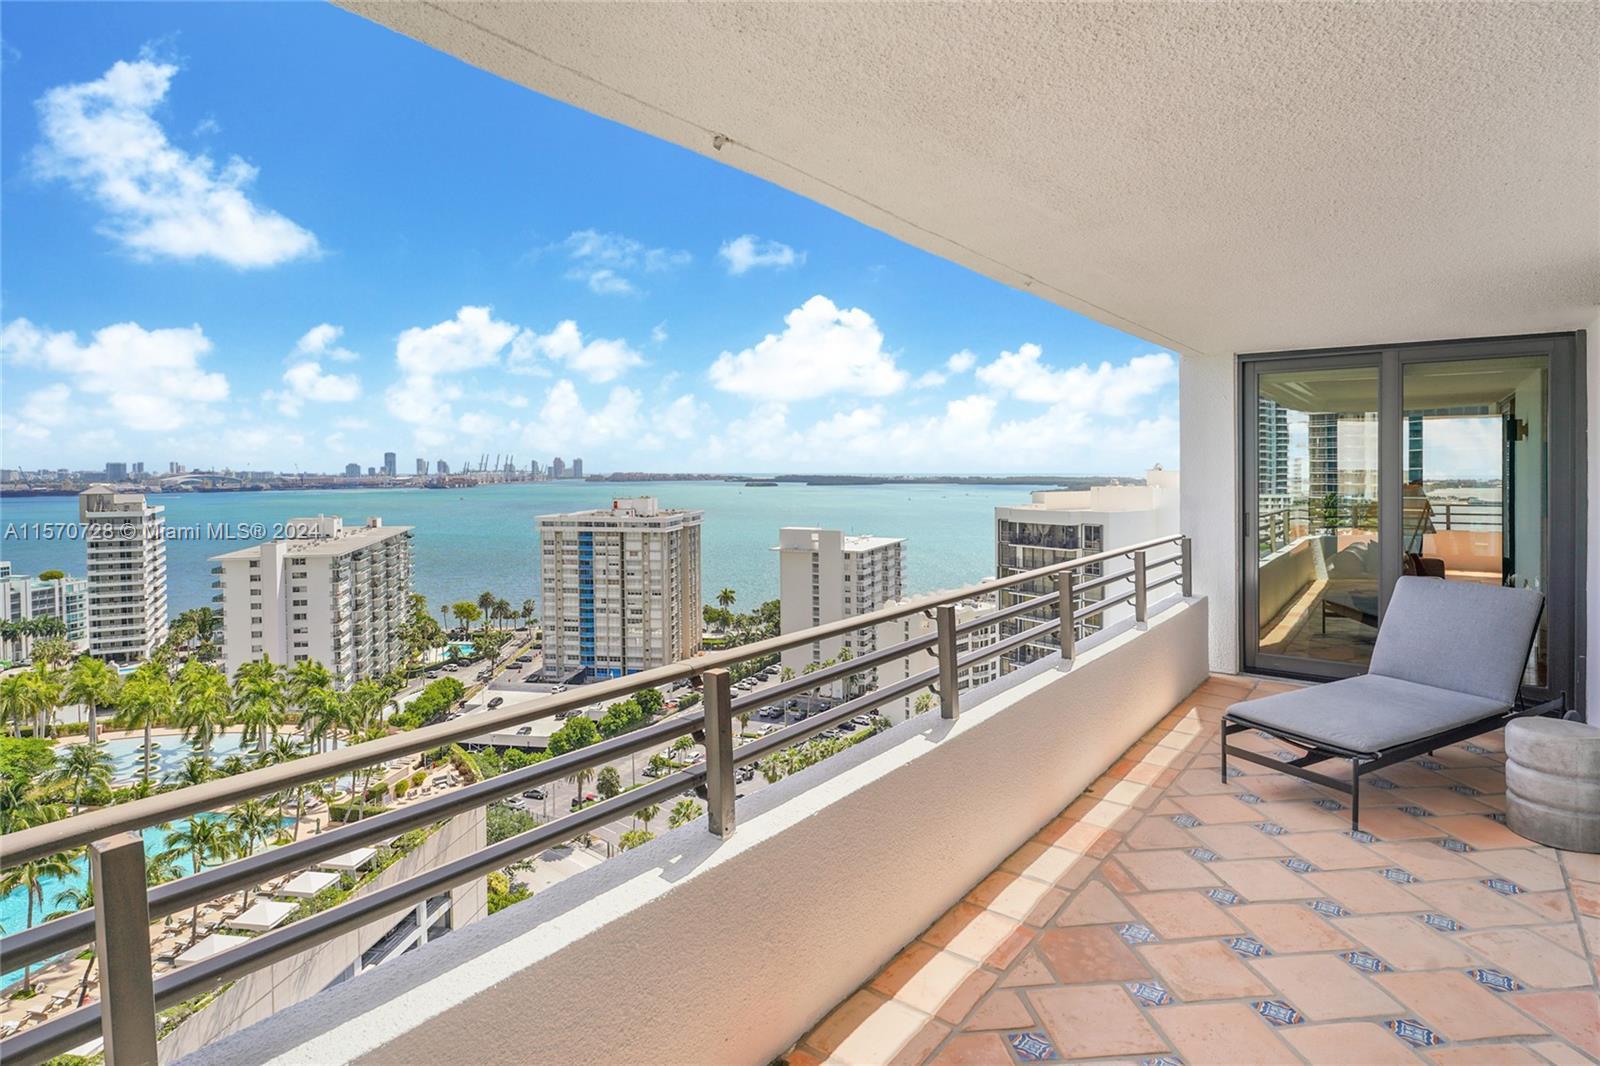 Breathtaking views of Biscayne Bay, Miami Beach, Fisher Island, and Key Biscayne await you at this e